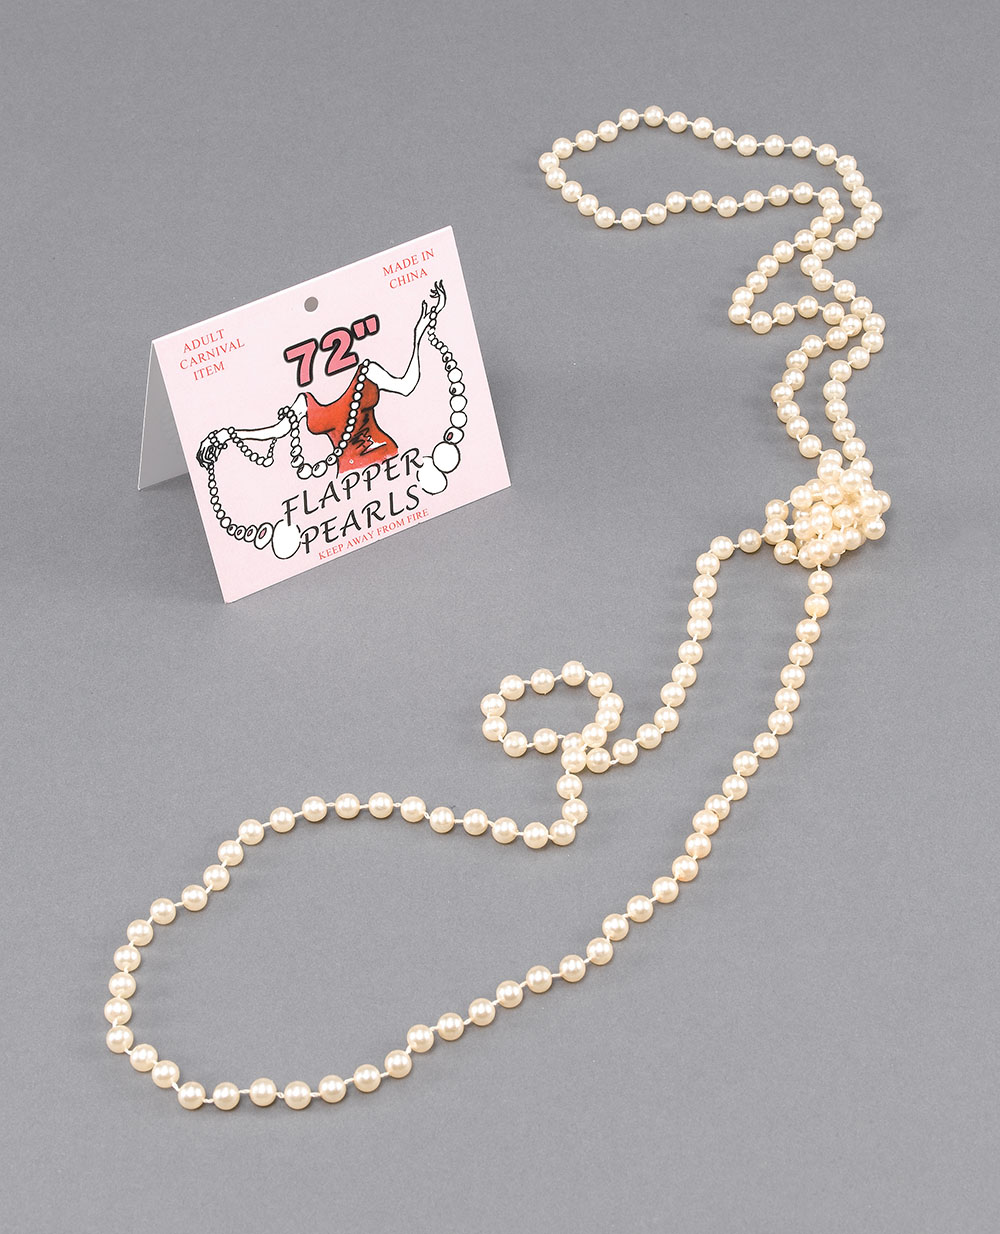 Flapper Beads. 72" Pearls